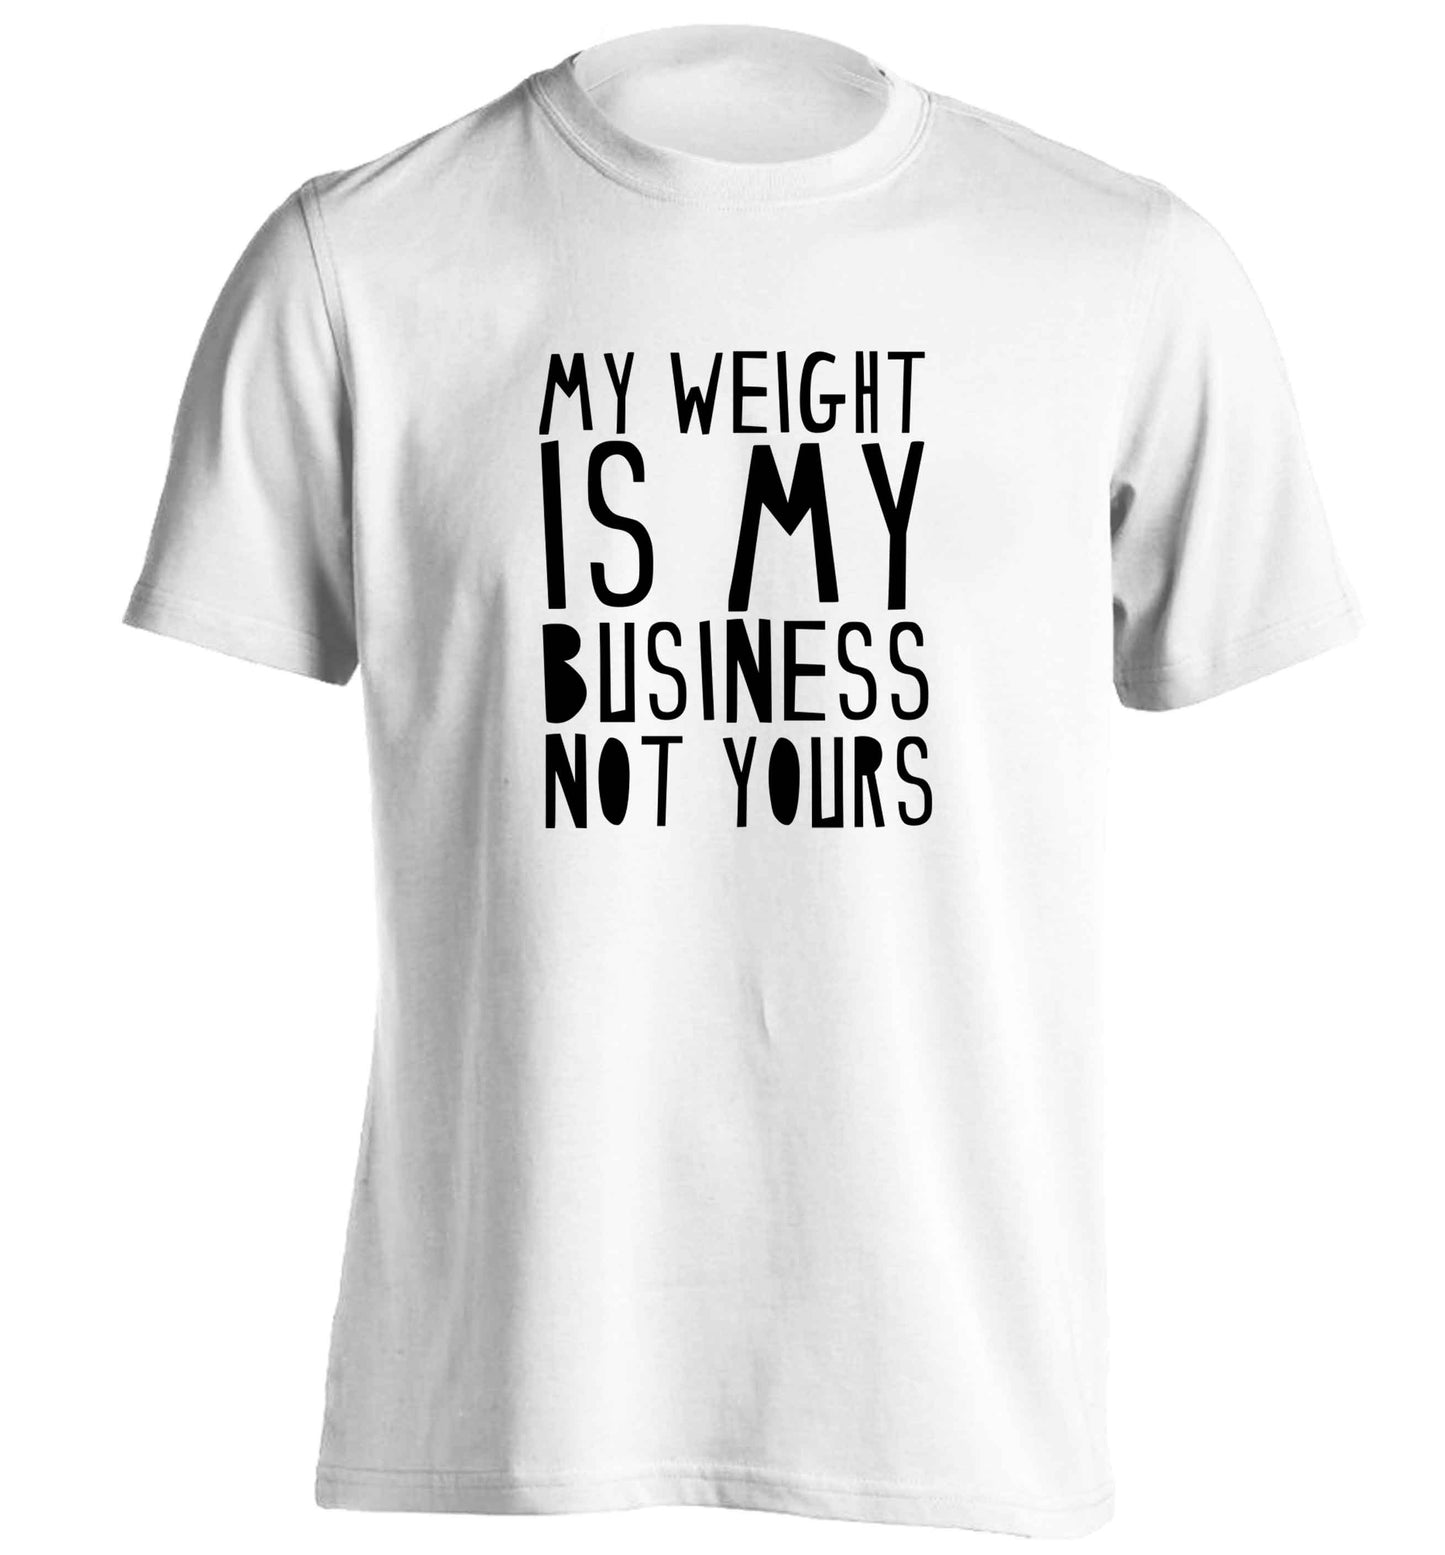 My weight is my business not yours adults unisex white Tshirt 2XL